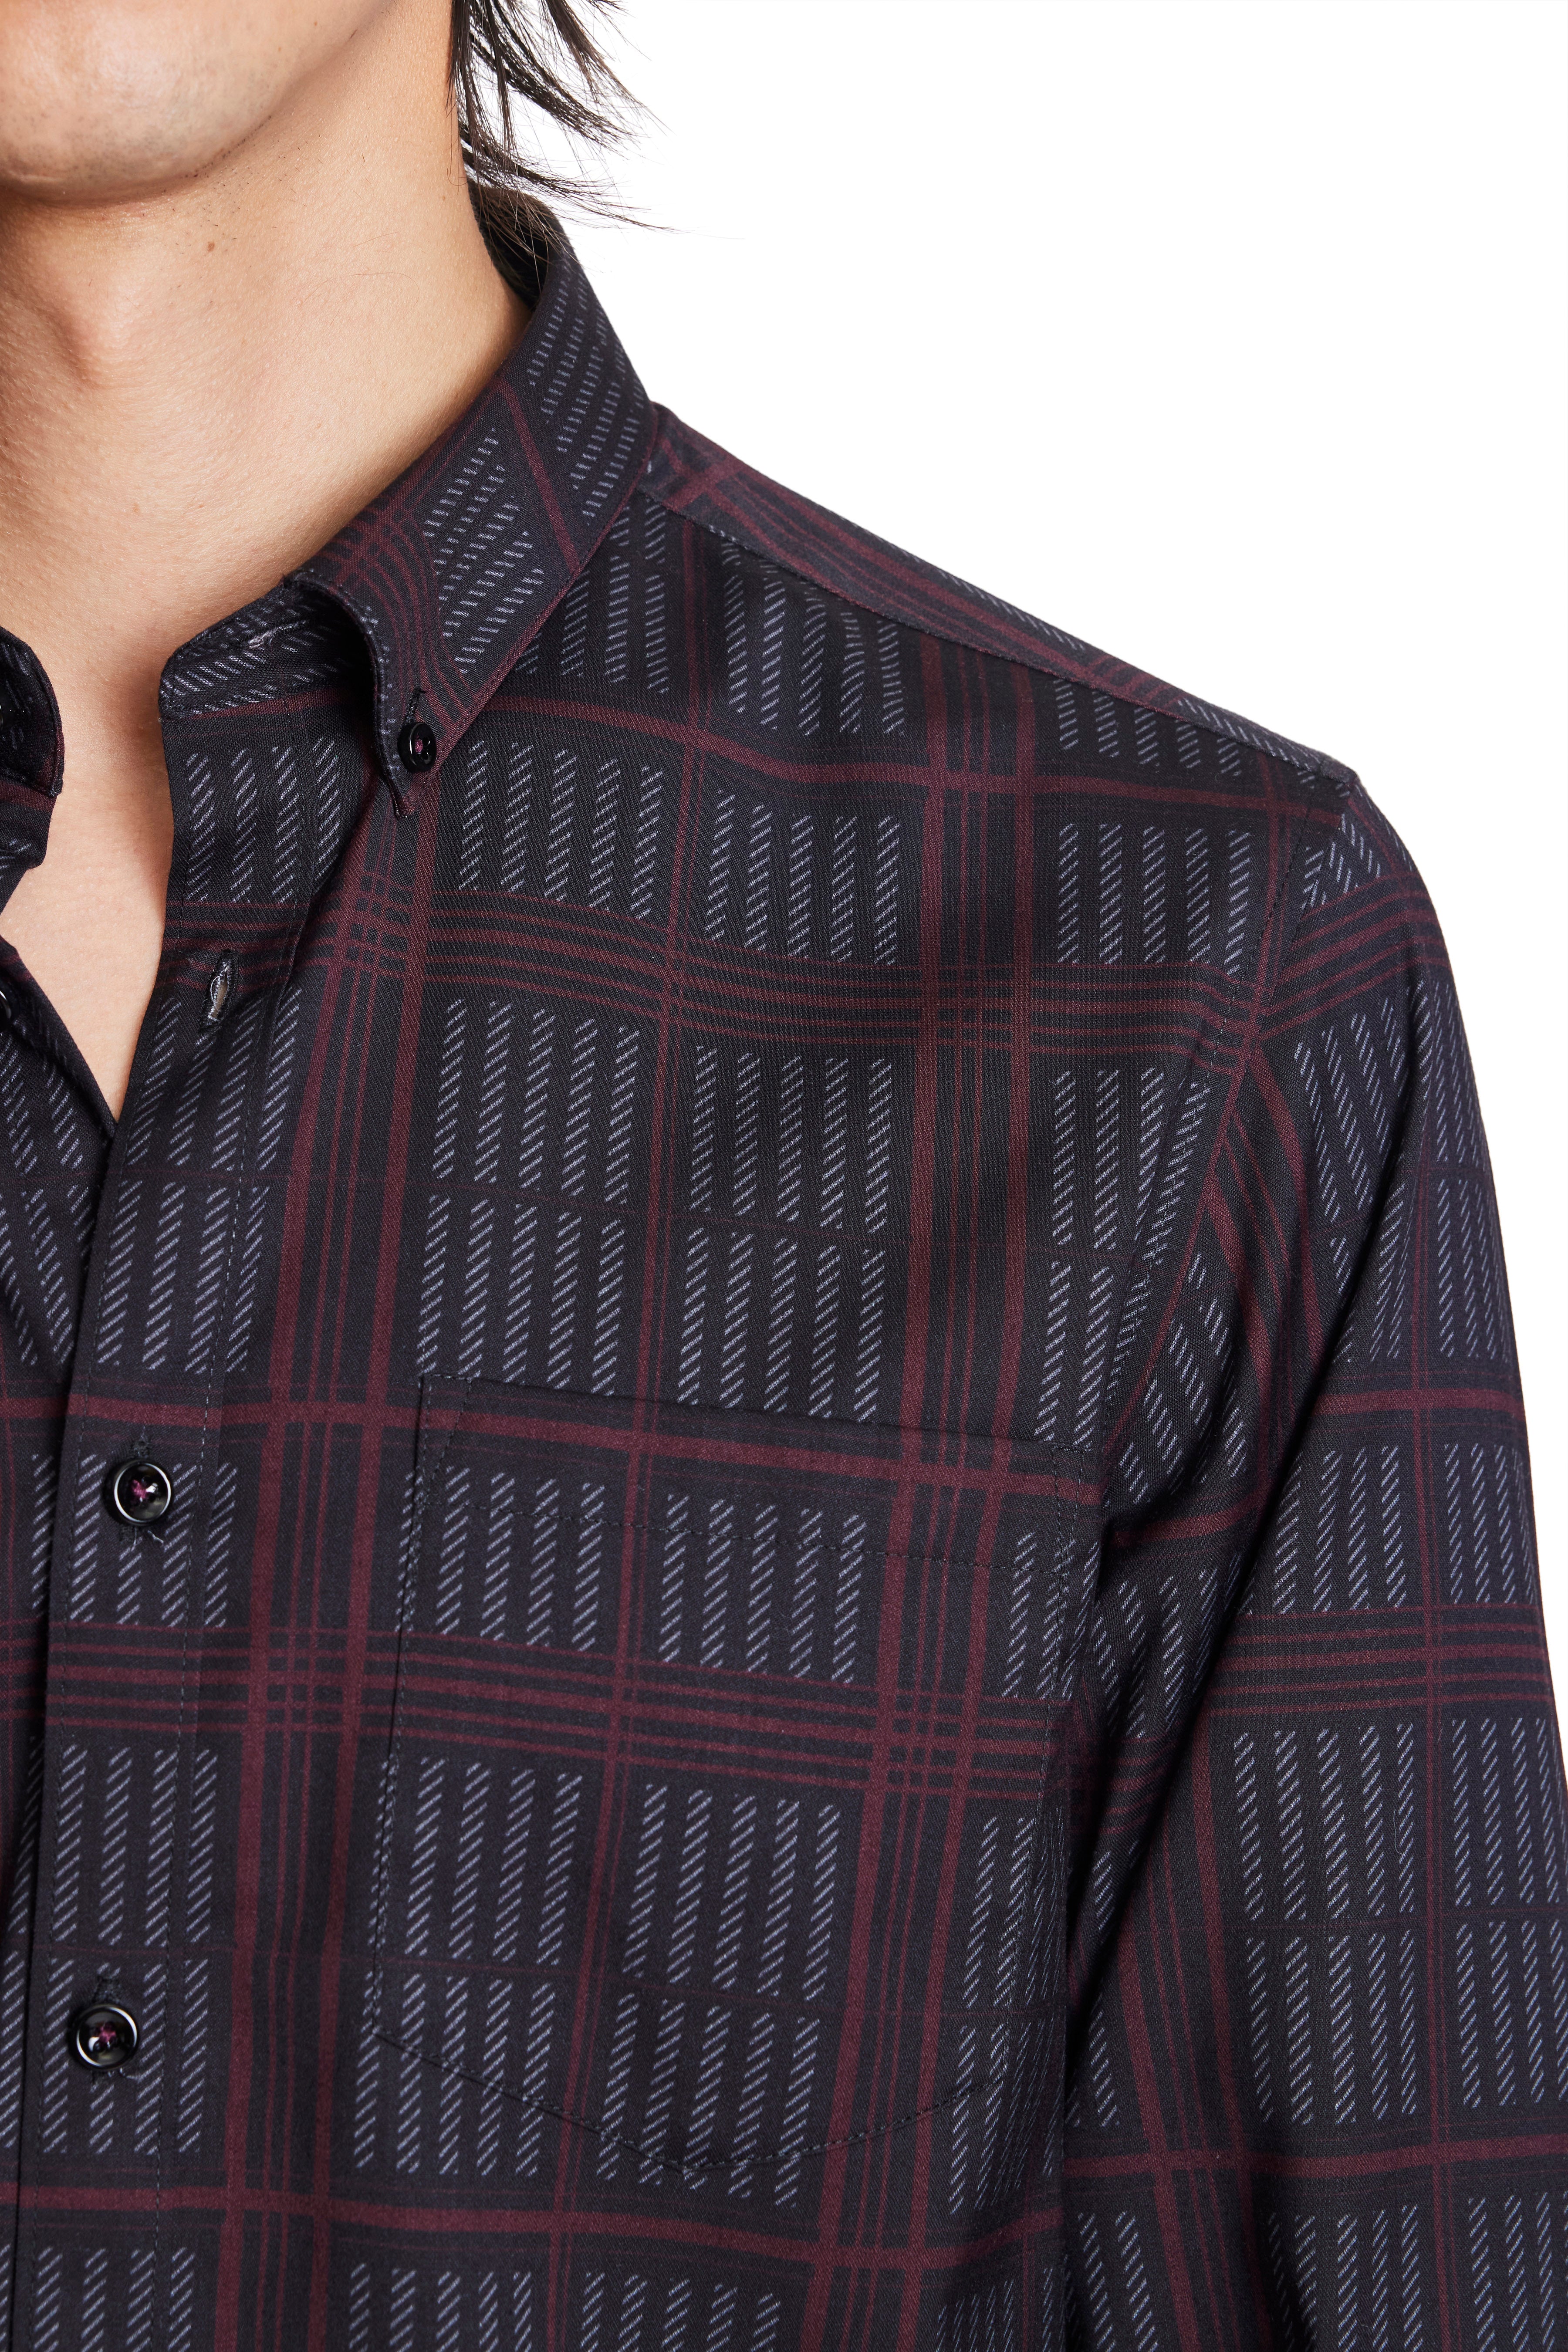 Brian Button Down Shirt - Black and Red